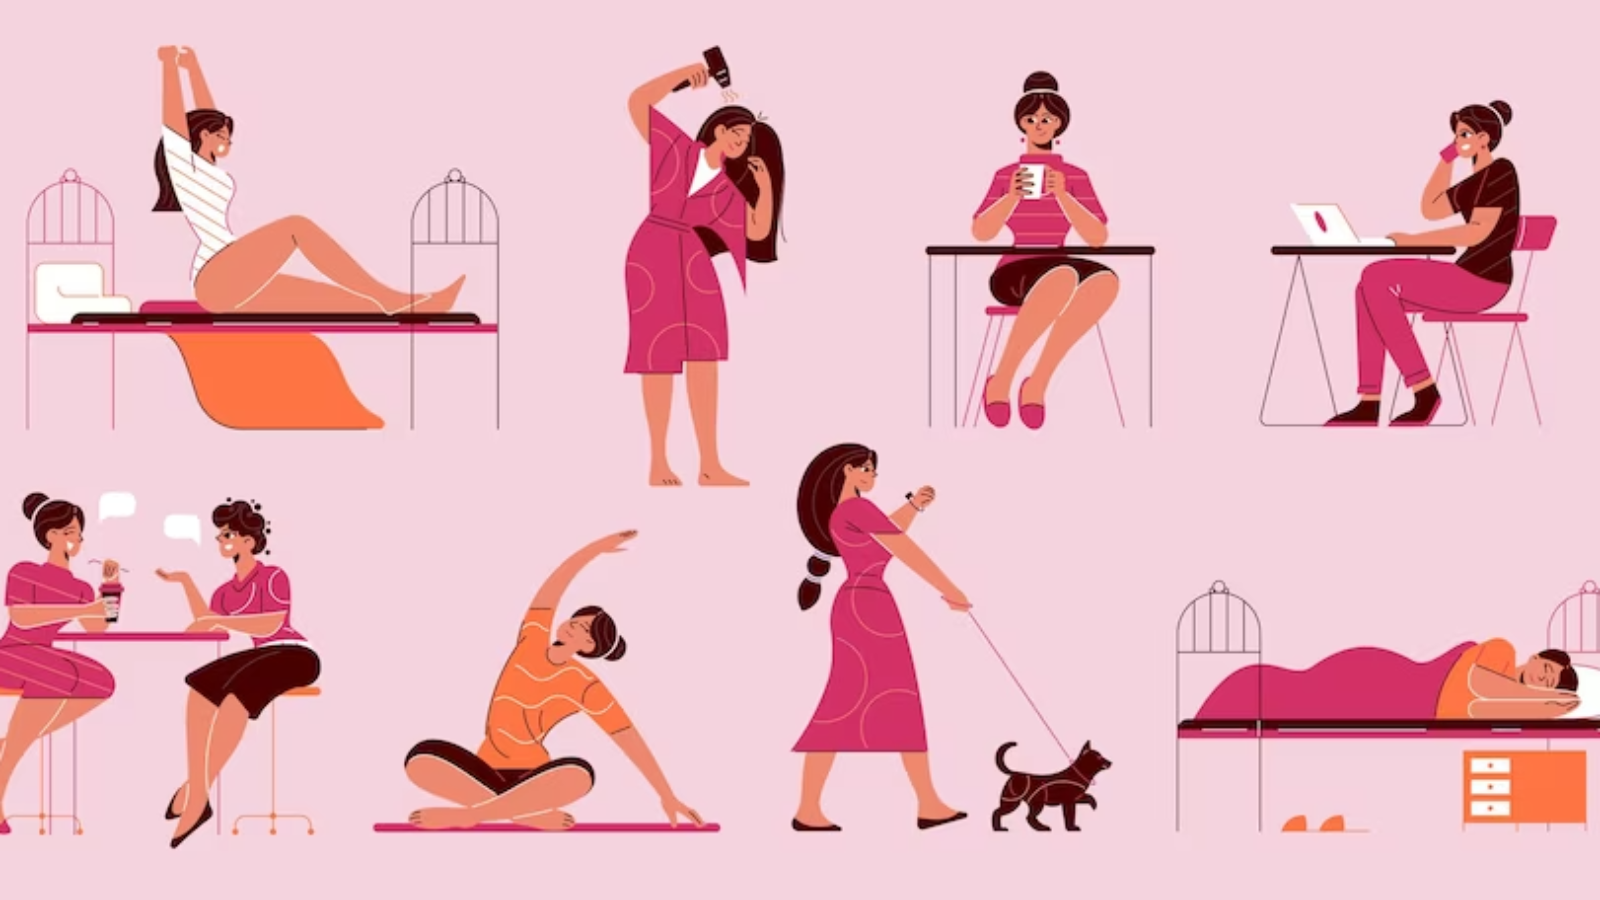 woman-daily-routine-set-with-isolated-icons-with-doodle-style-female-characters-during-various-everyday-activities-illustration_1284-61270-jpg-900×457-